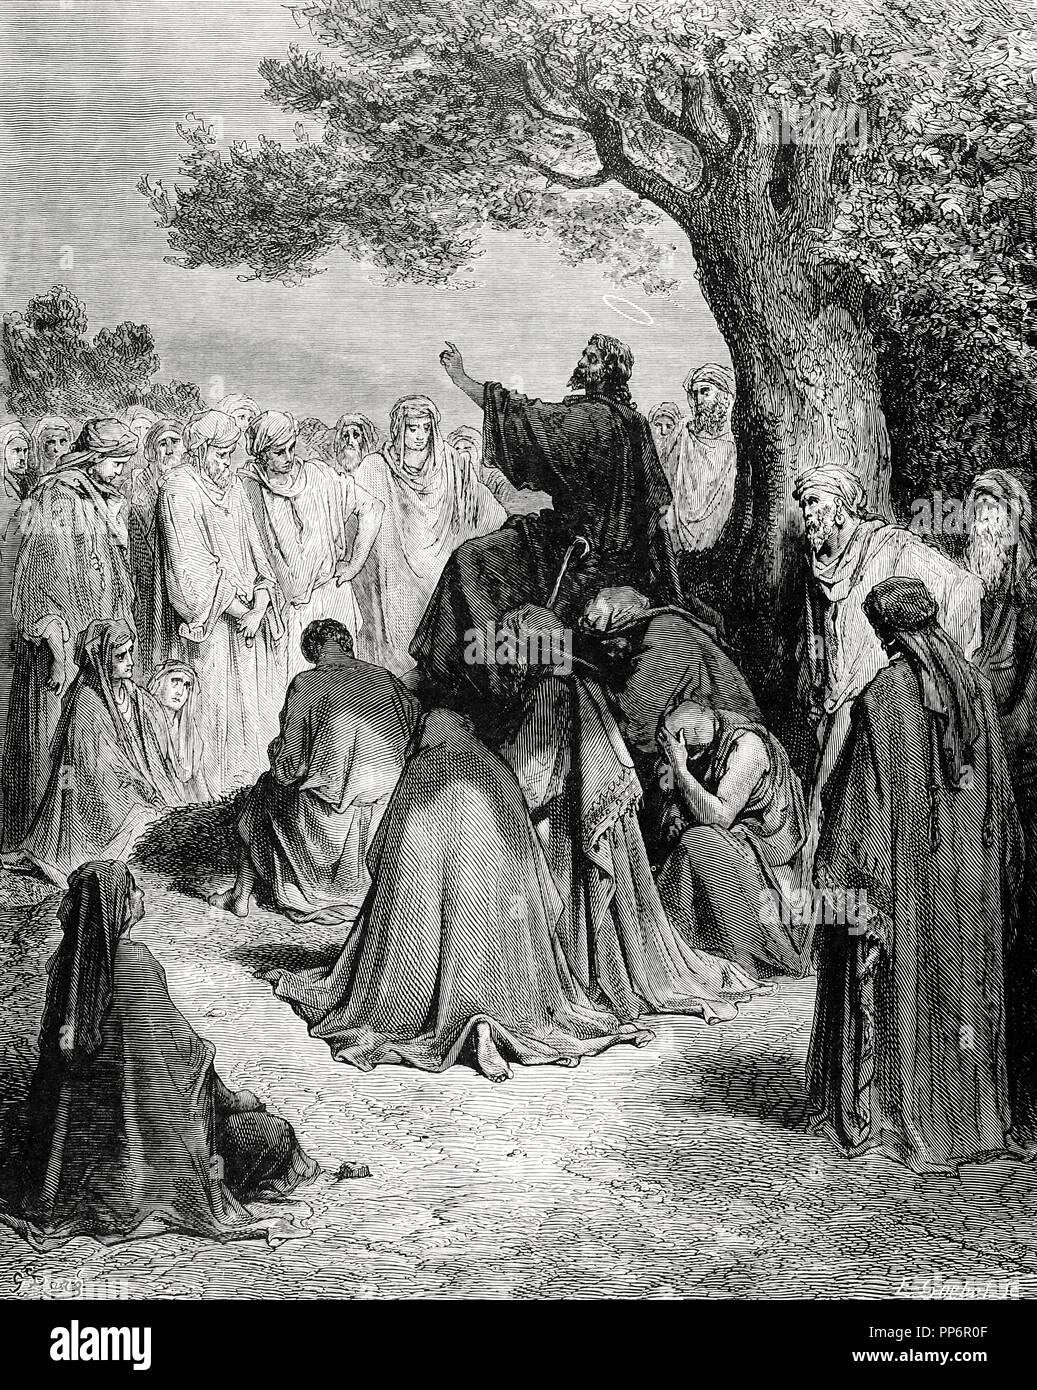 New Testament. Jesus preaching to the crowd. Gospel of Matthew, Chapter IV, Verses 17-22. Engraving. 19th century. Stock Photo